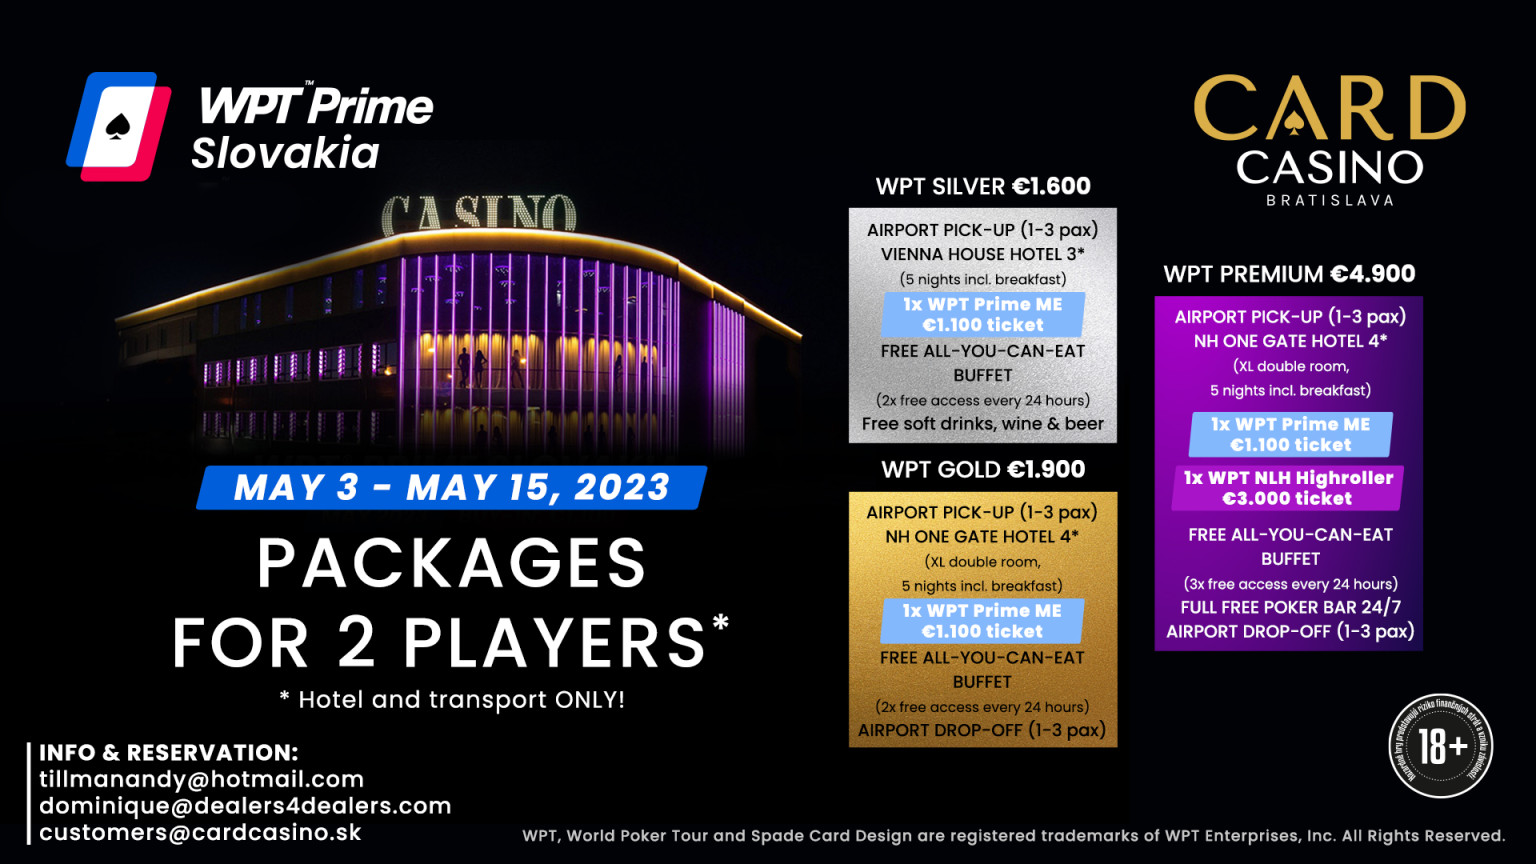 Enjoy the World WPT with three exclusive package options